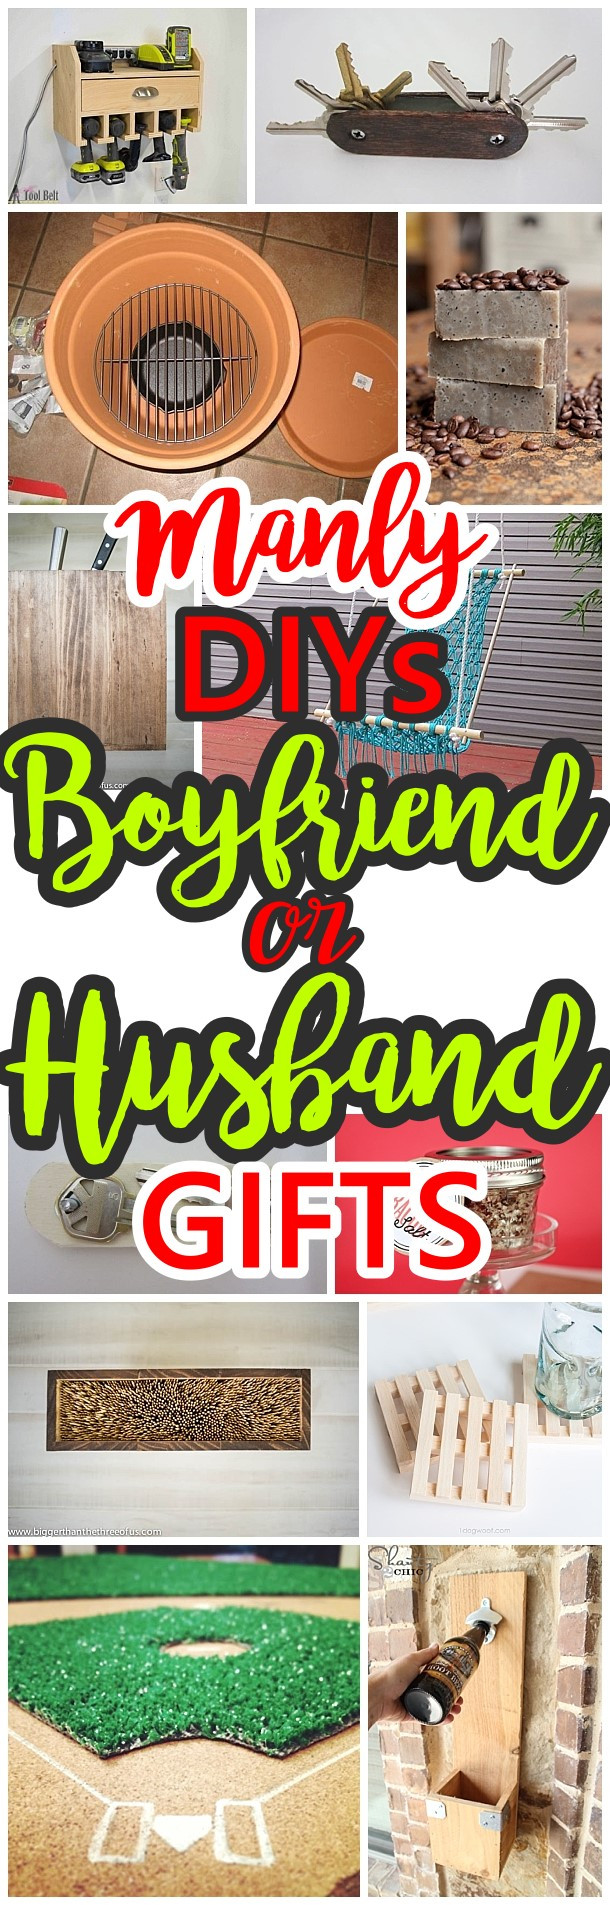 Gift Ideas For Husband Christmas
 Manly Do It Yourself Boyfriend and Husband Gift Ideas